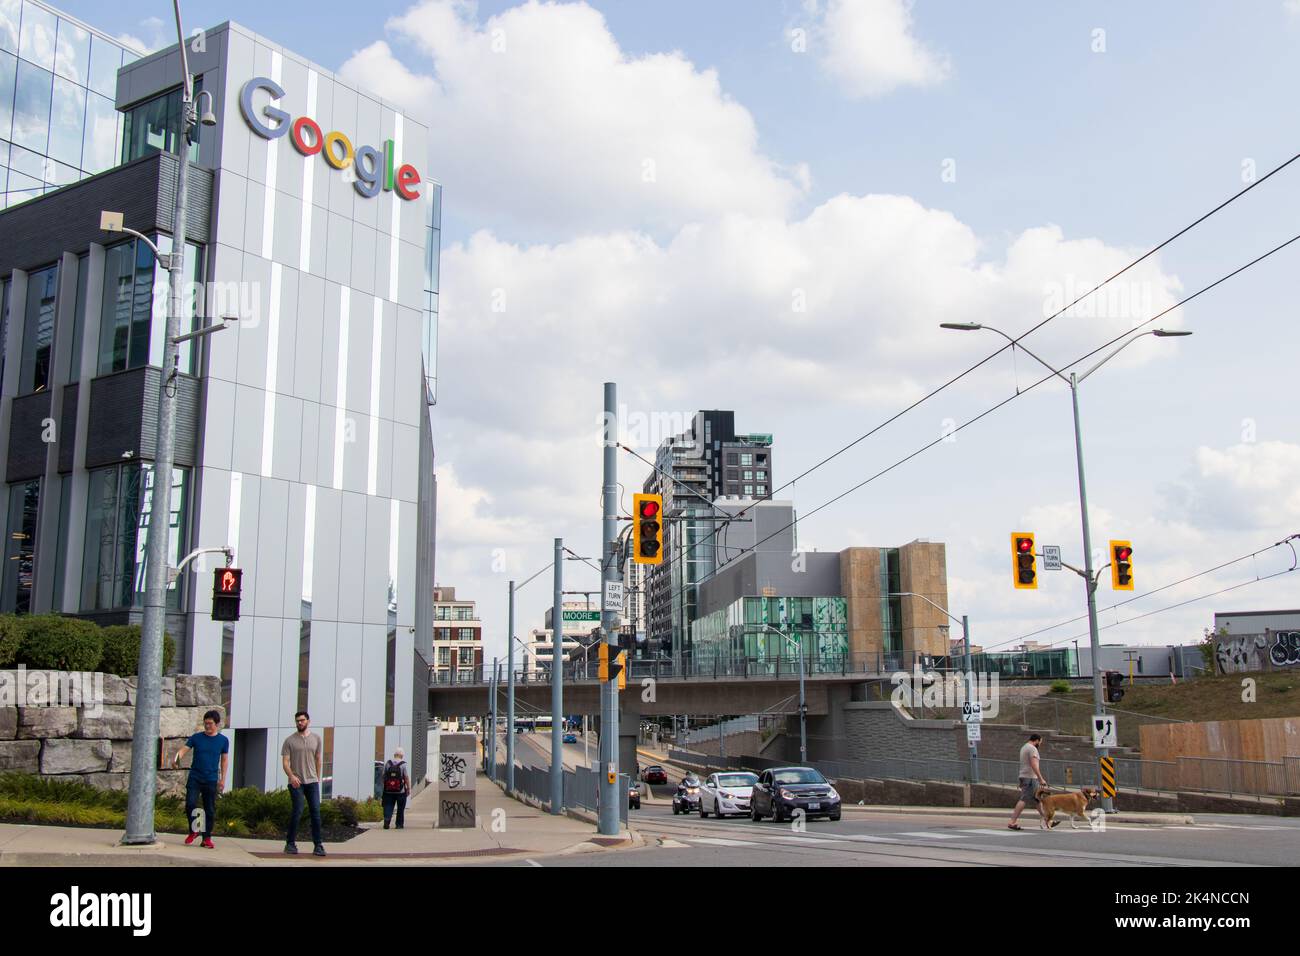 A Google office building in downtown Kitchener is seen during the day. Stock Photo